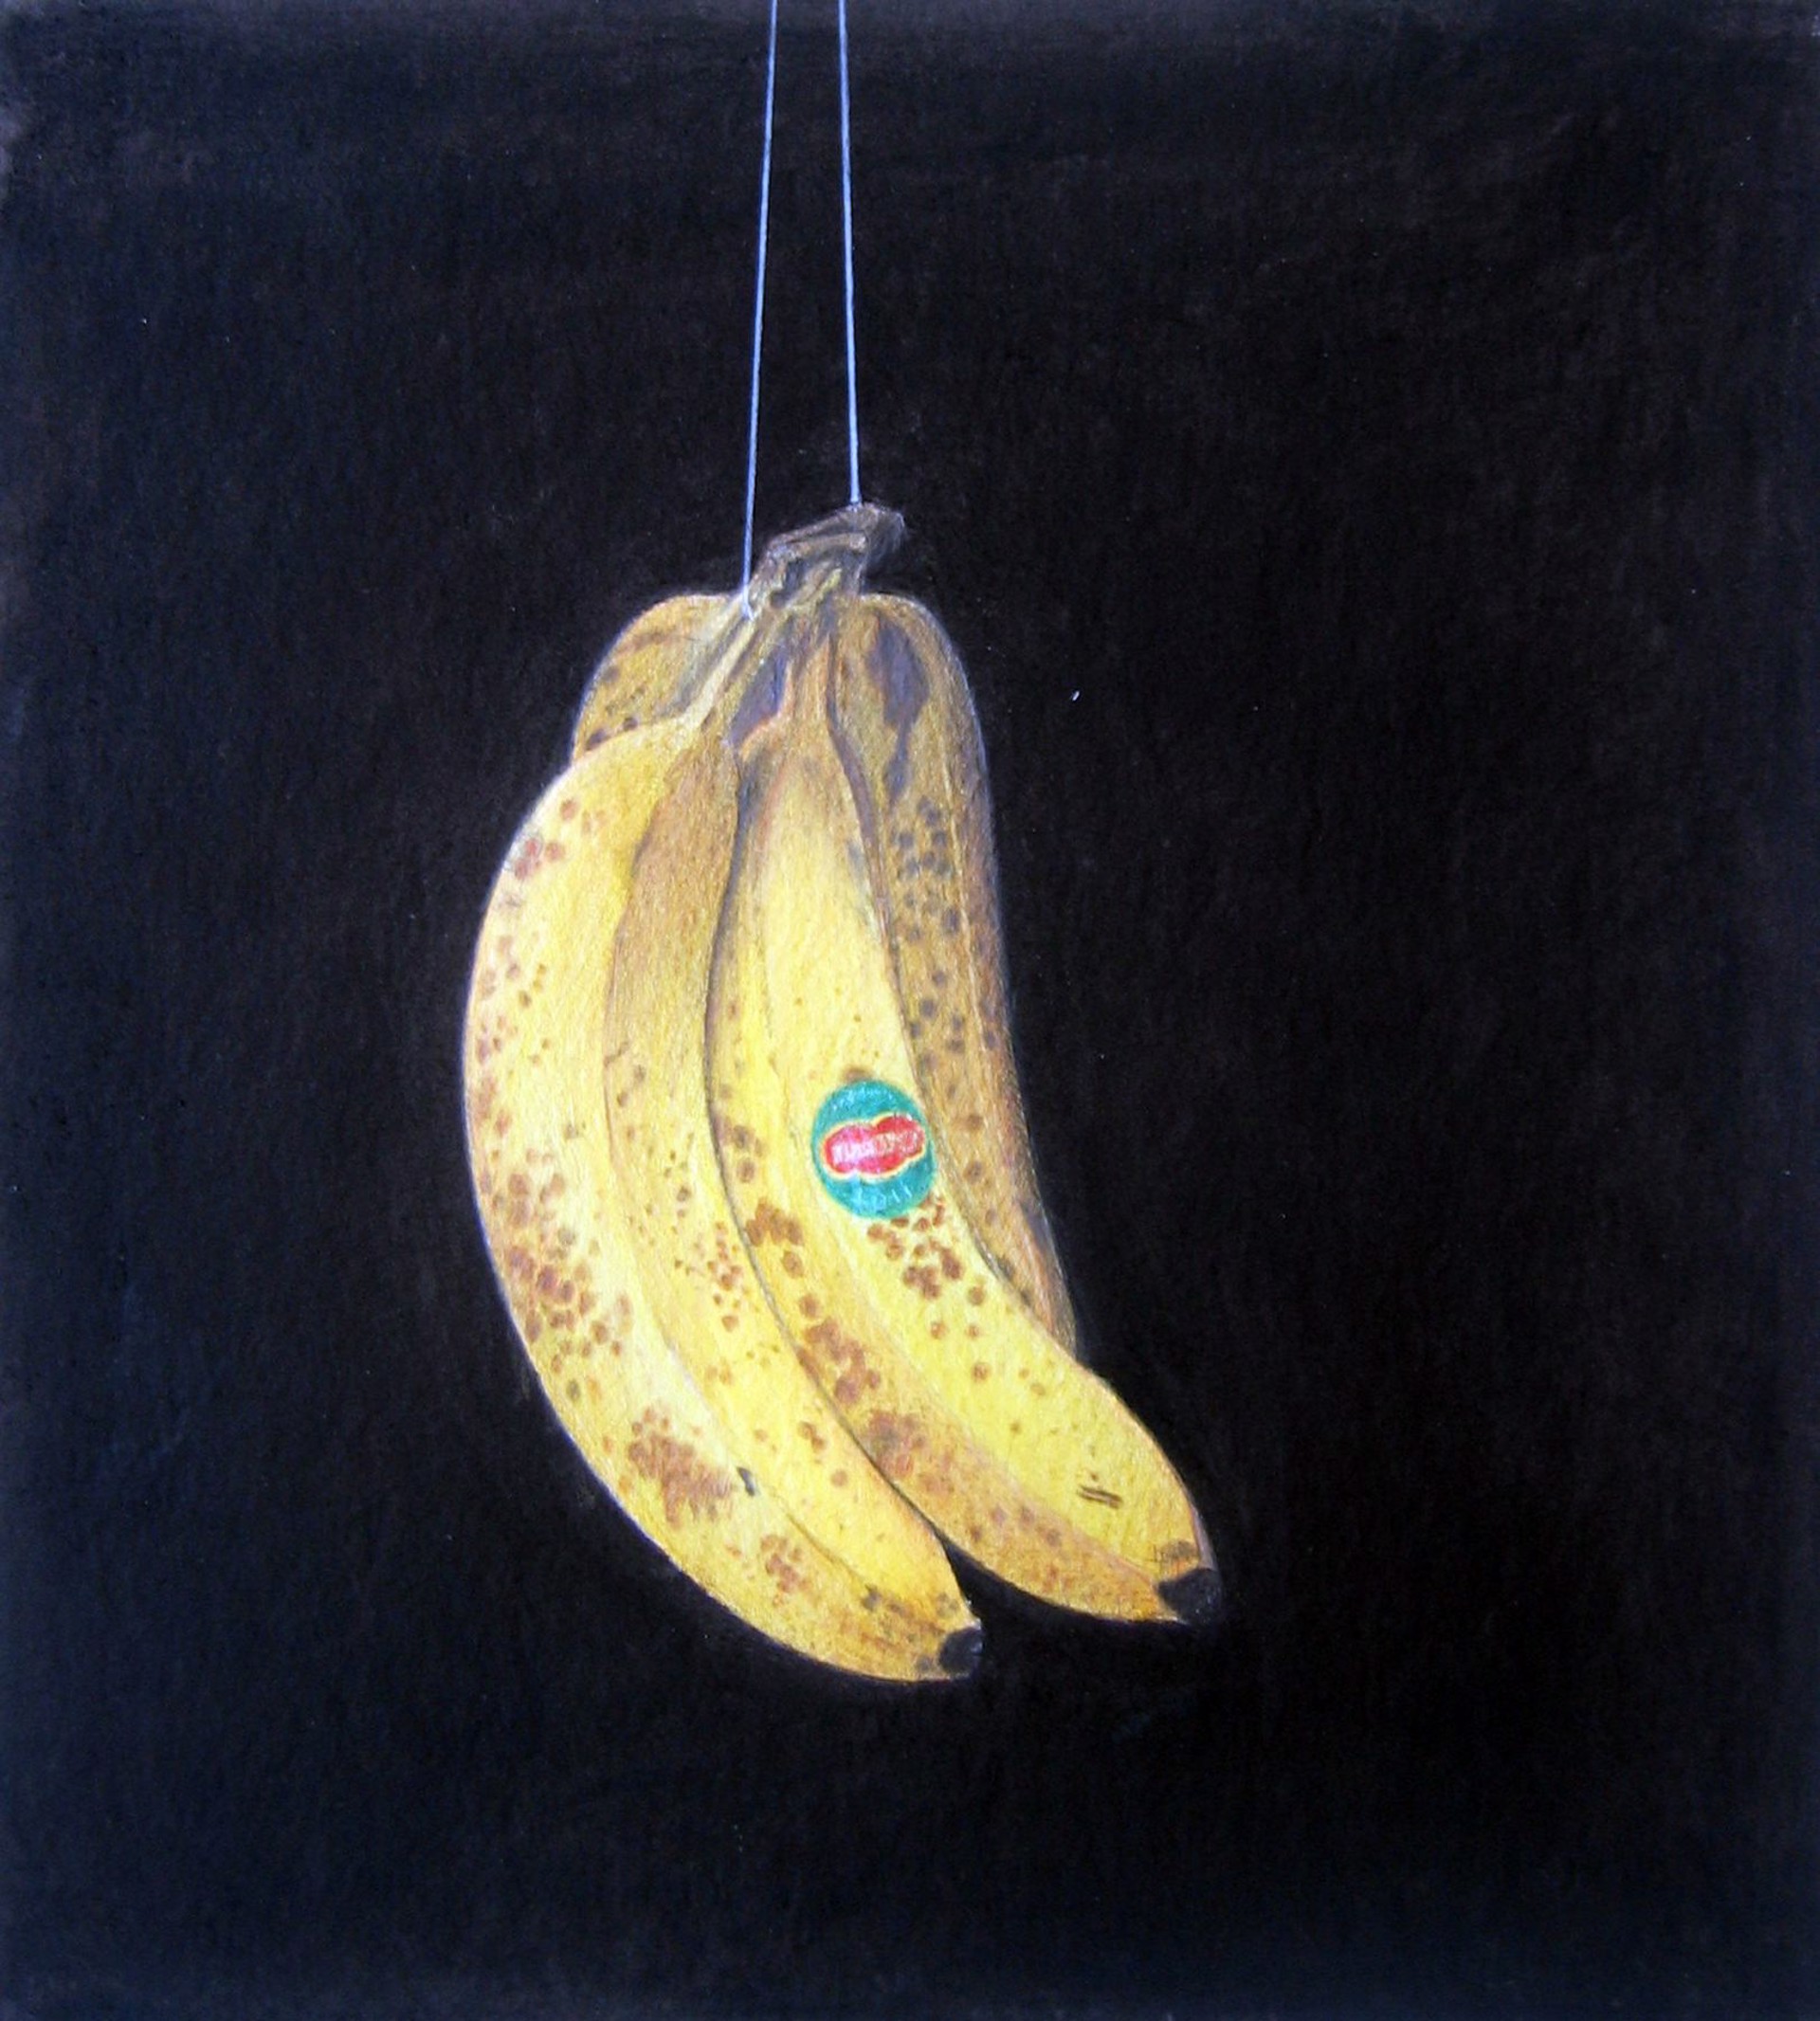 Untitled (Suspended Bananas) by Donald Campbell